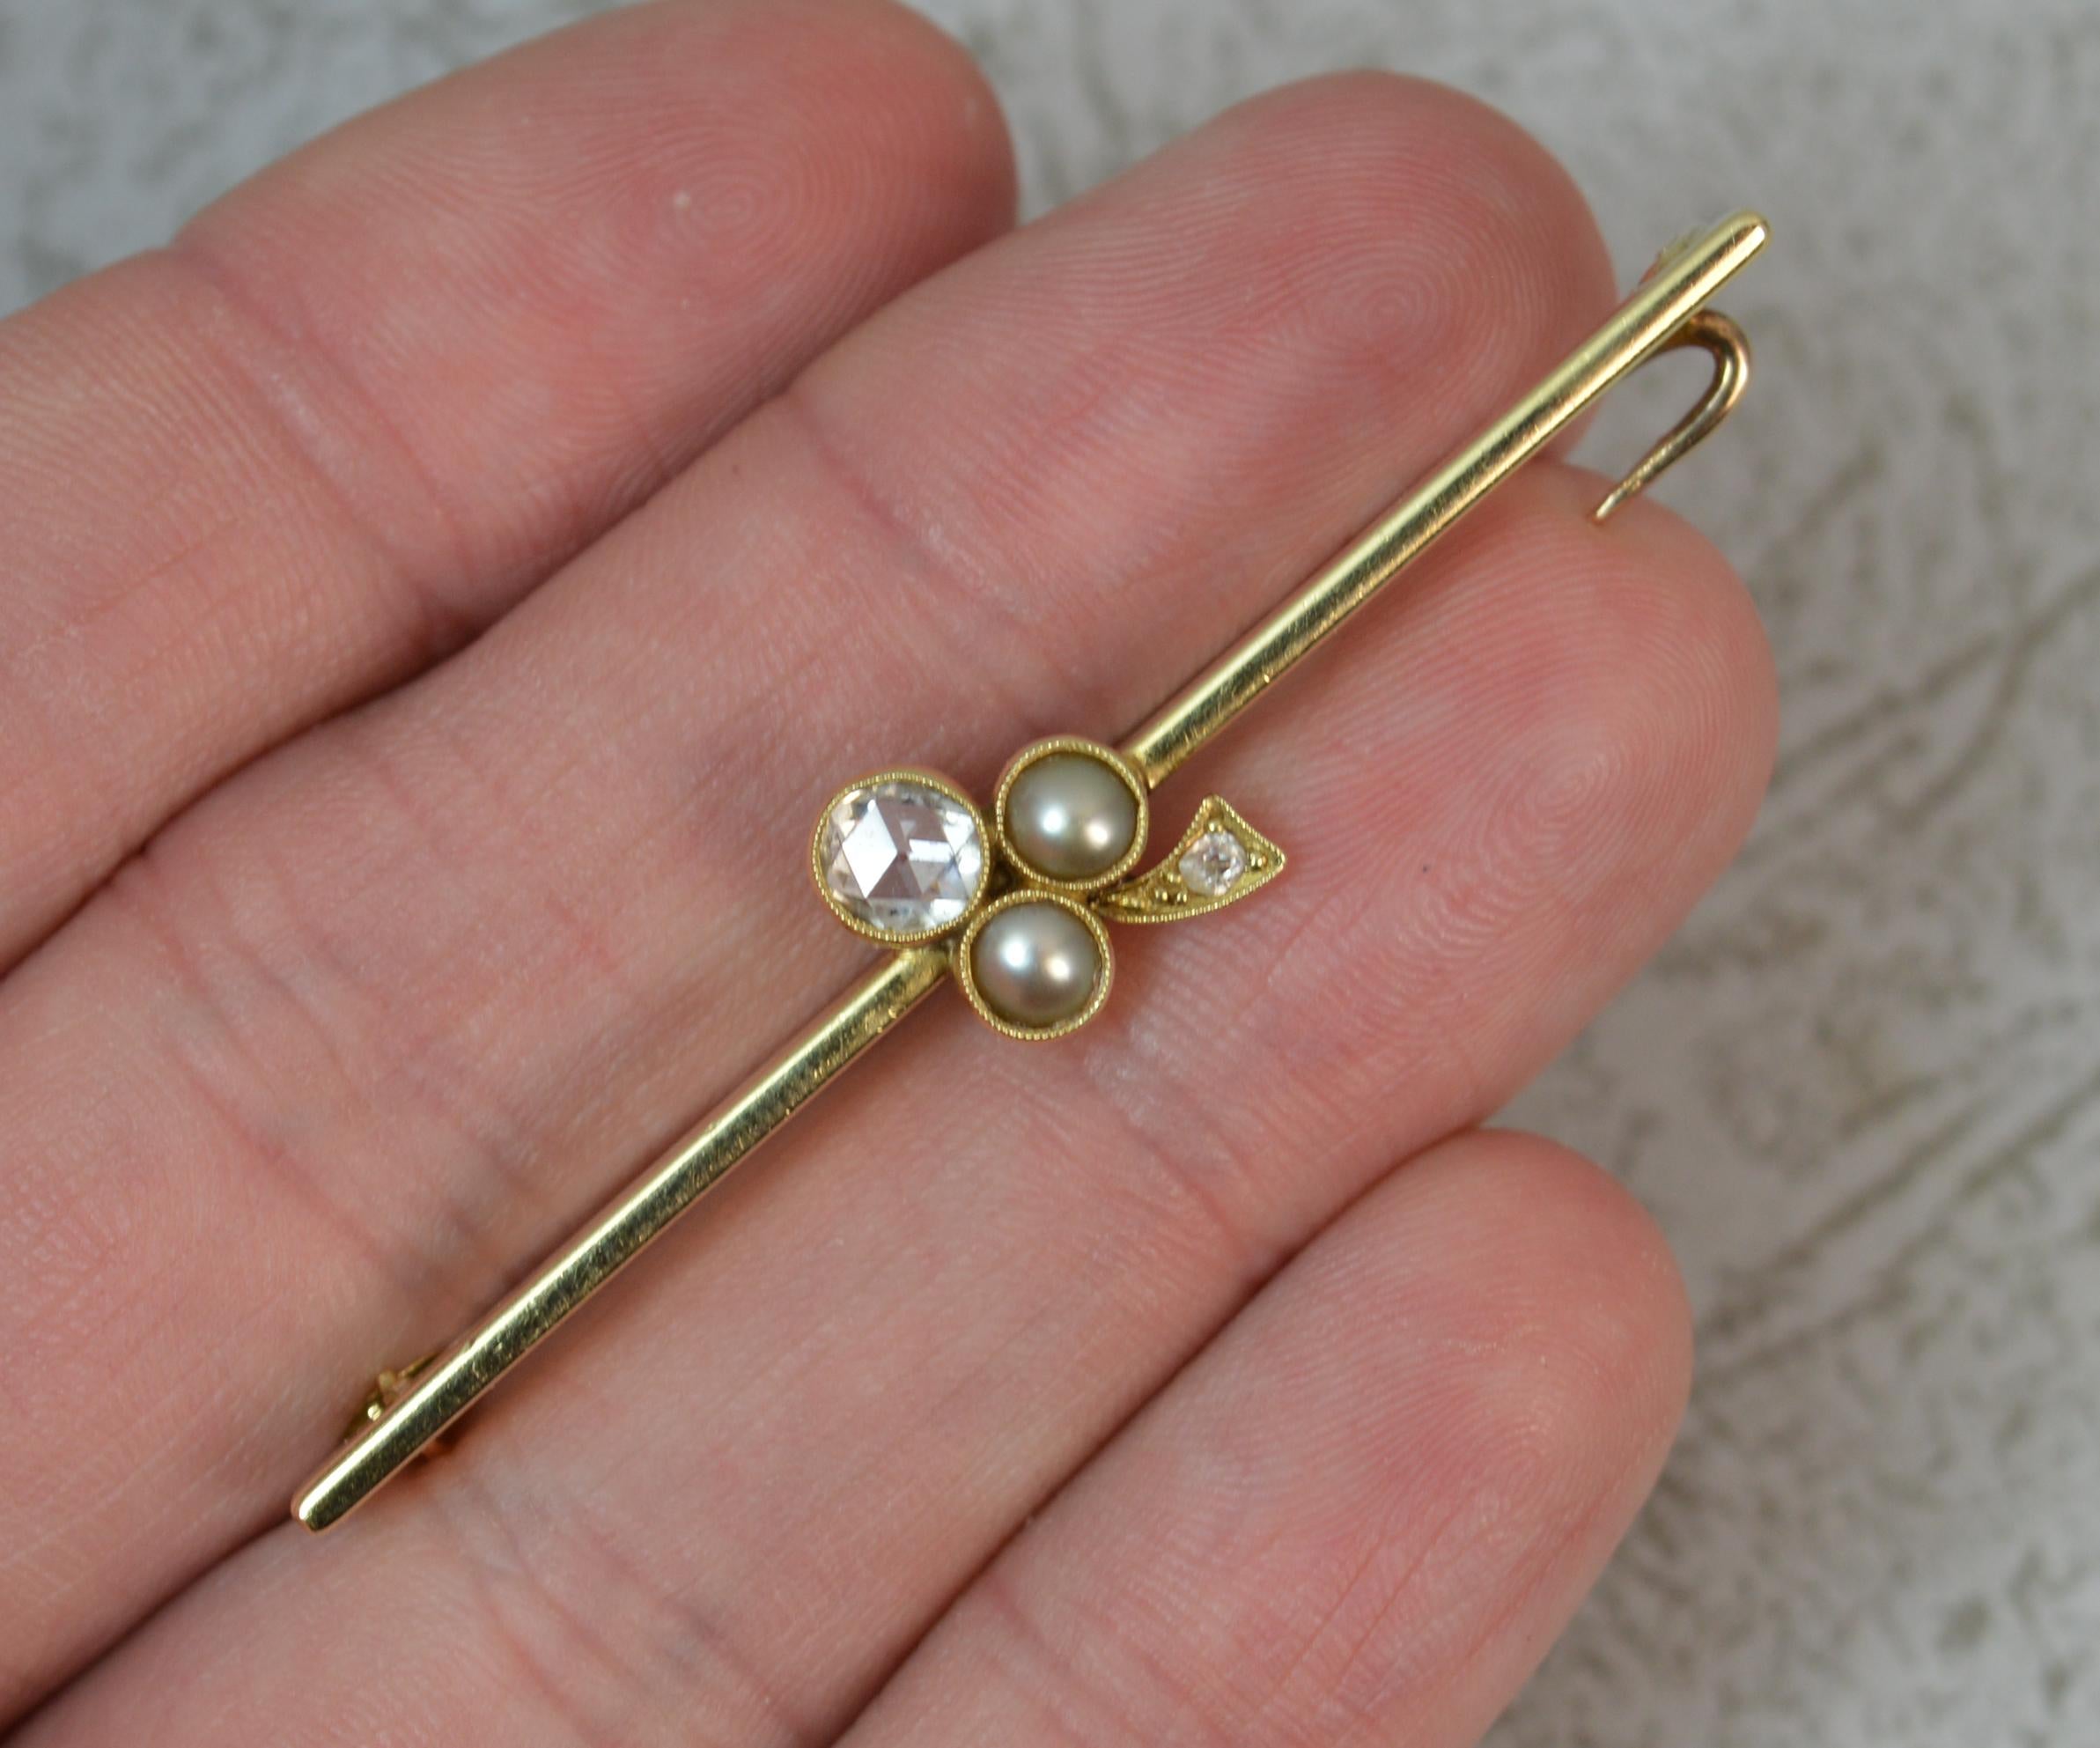 A stunning quality bar brooch.
15 carat yellow gold example.
Designed with a three leaf clover design comprising of large rose cut diamond, spreads 0.5ct with two pearls to each side and a further old cut diamond below. All fine grain bezel